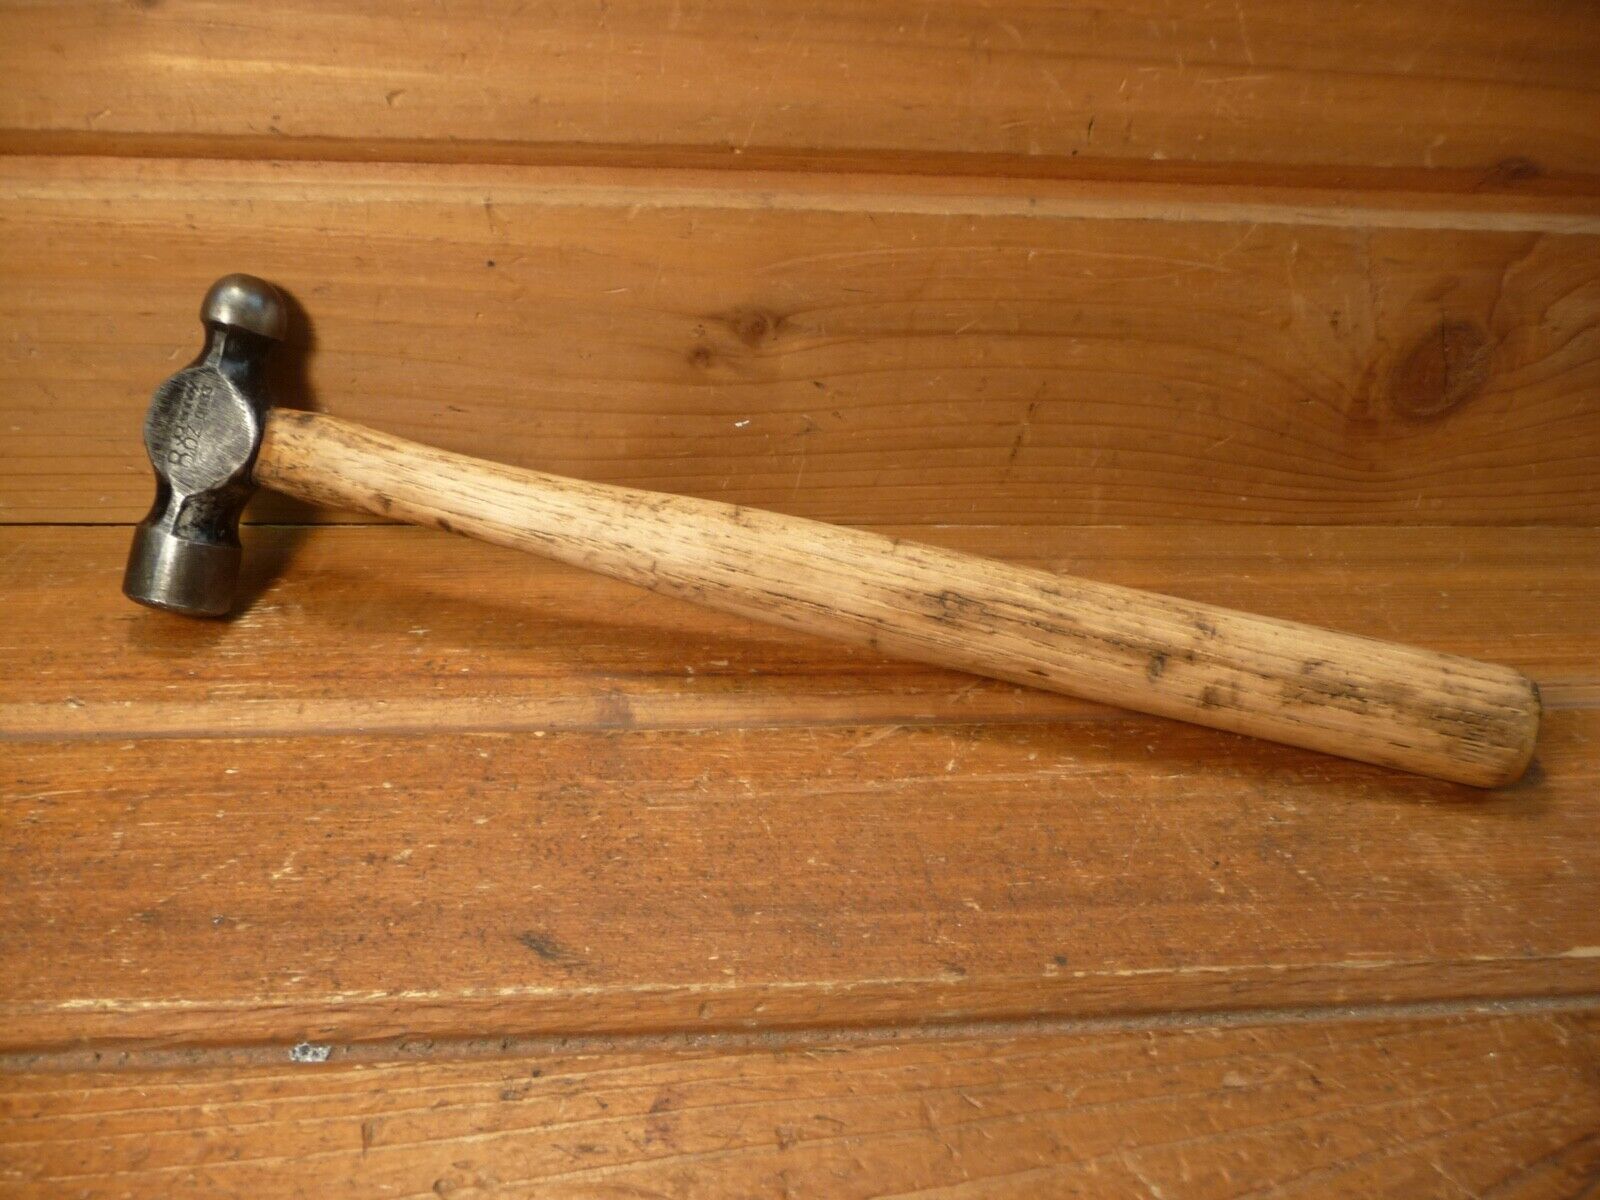 Vintage JC PENNEY Ball Pein Peen Hammer 8oz with Handle